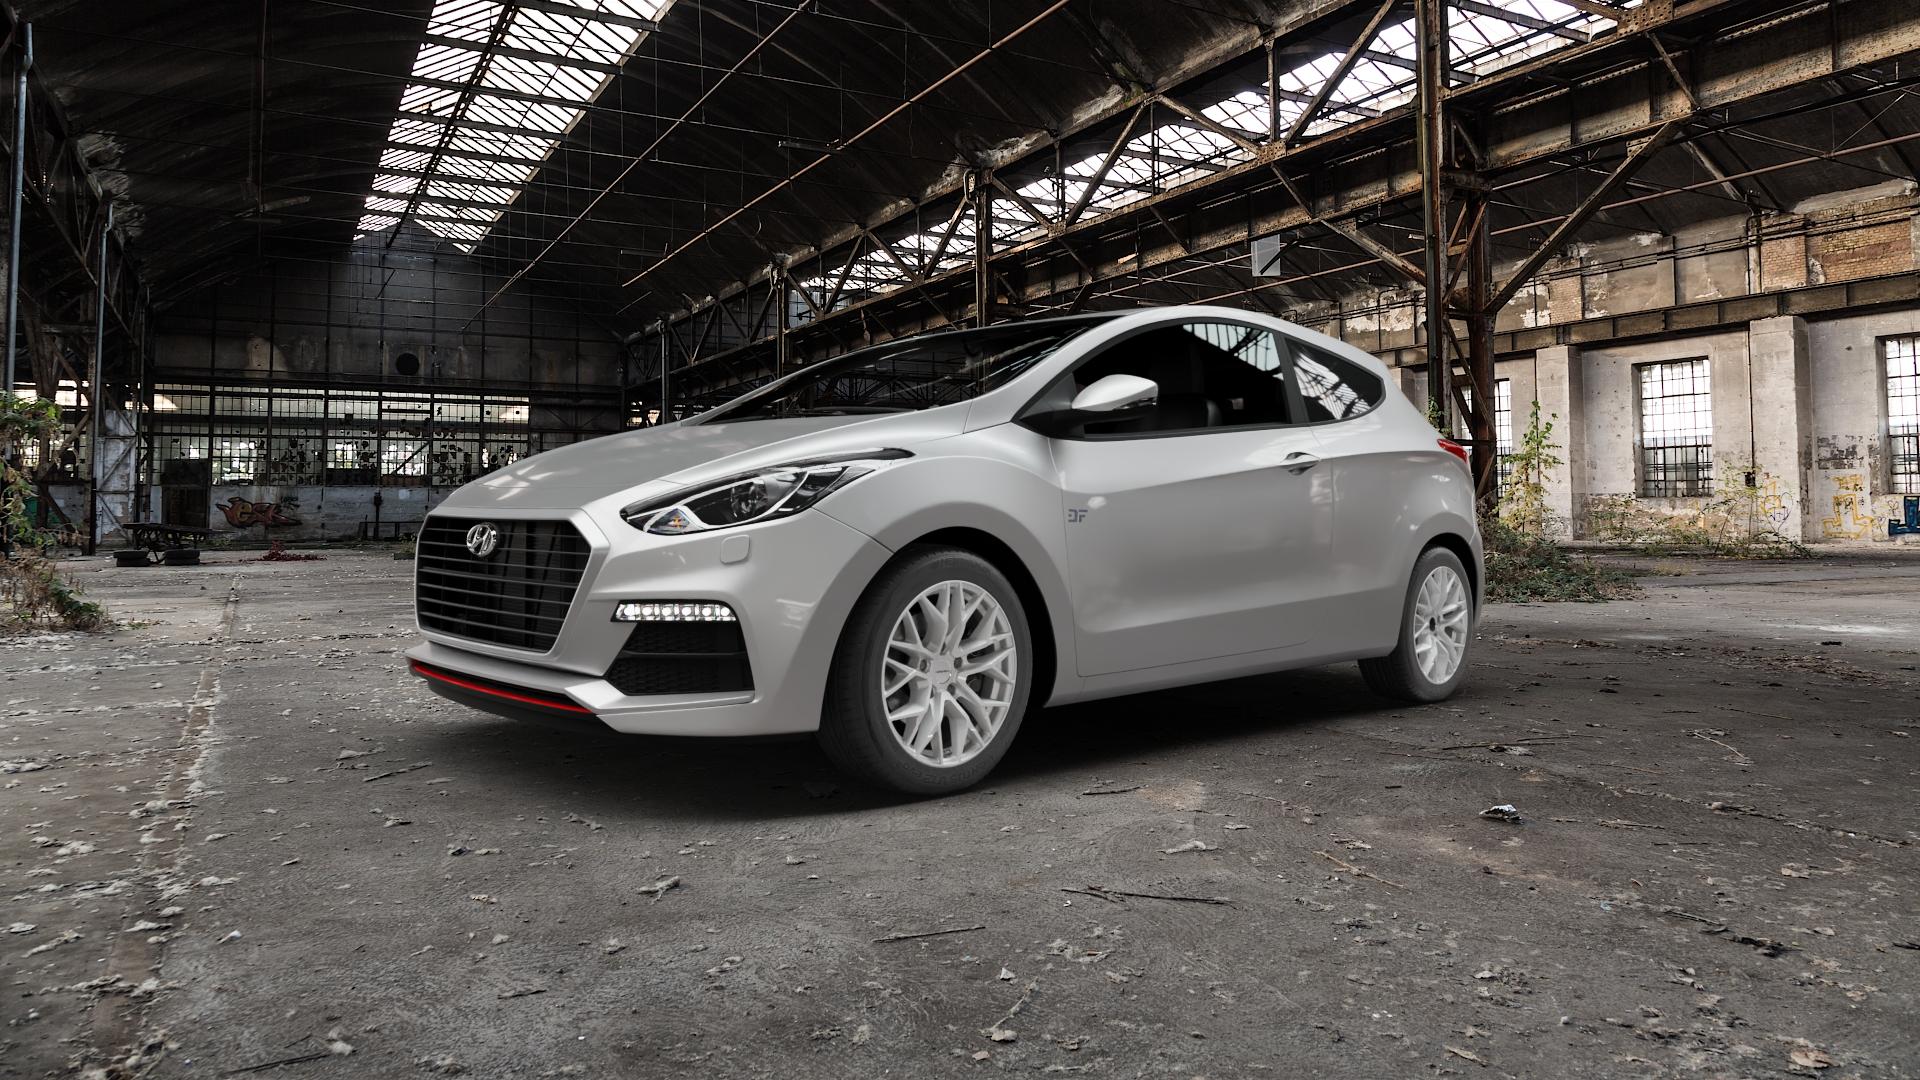 CARMANI 20 Ludwig white silver Felge mit Reifen silber weiss in 16Zoll Winterfelge Alufelge auf silbernem Hyundai i30 Typ GDH Coupe Facelift ⬇️ mit 15mm Tieferlegung ⬇️ Old Industrial Hall_max5000mm_2022 Frontansicht_1